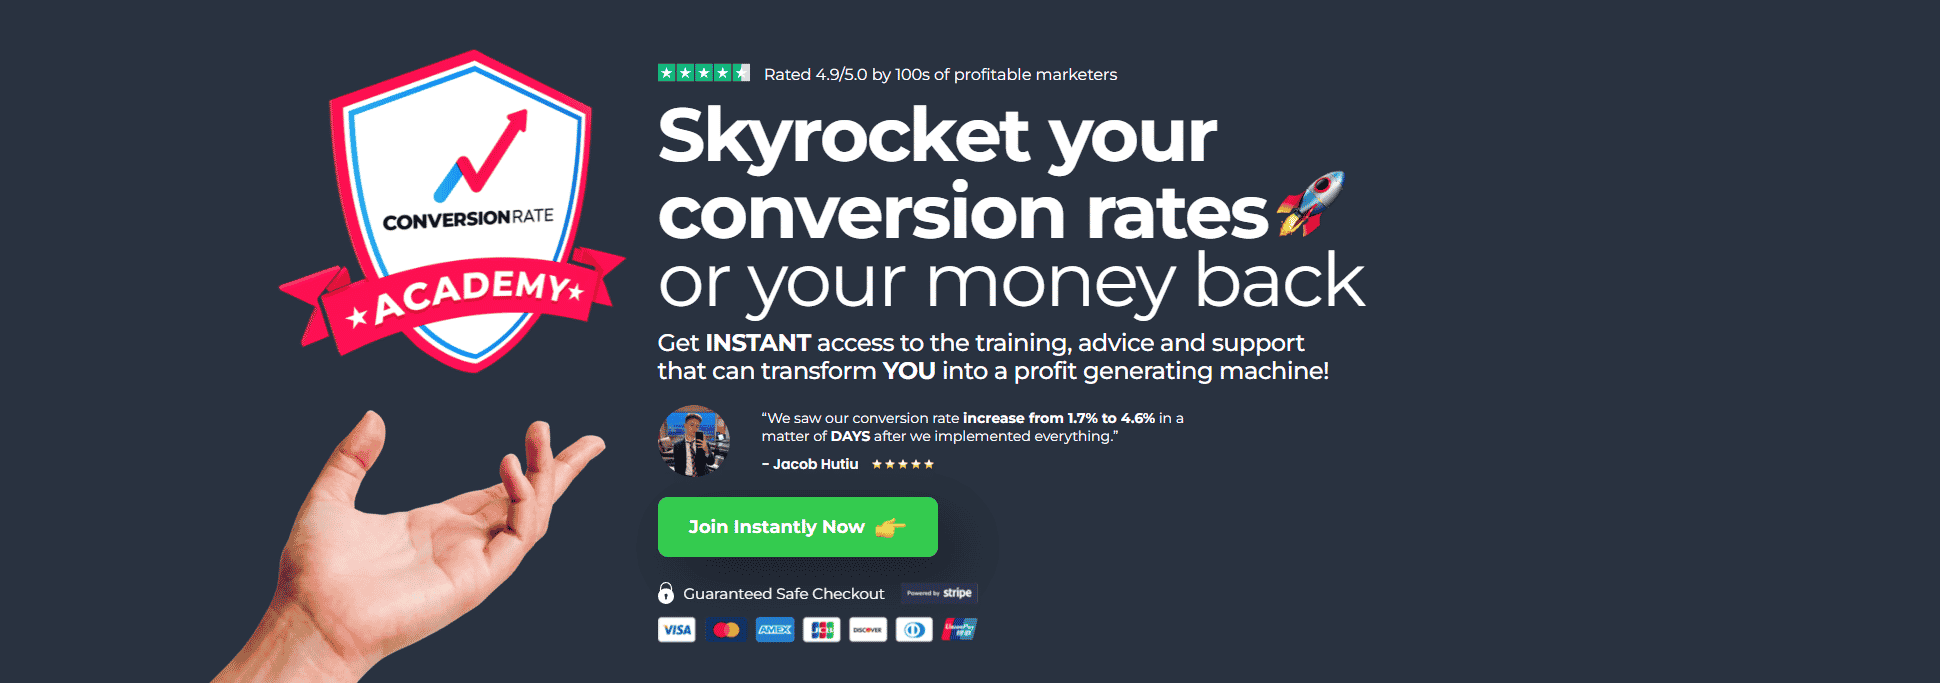 Conversion Rate Academy 1